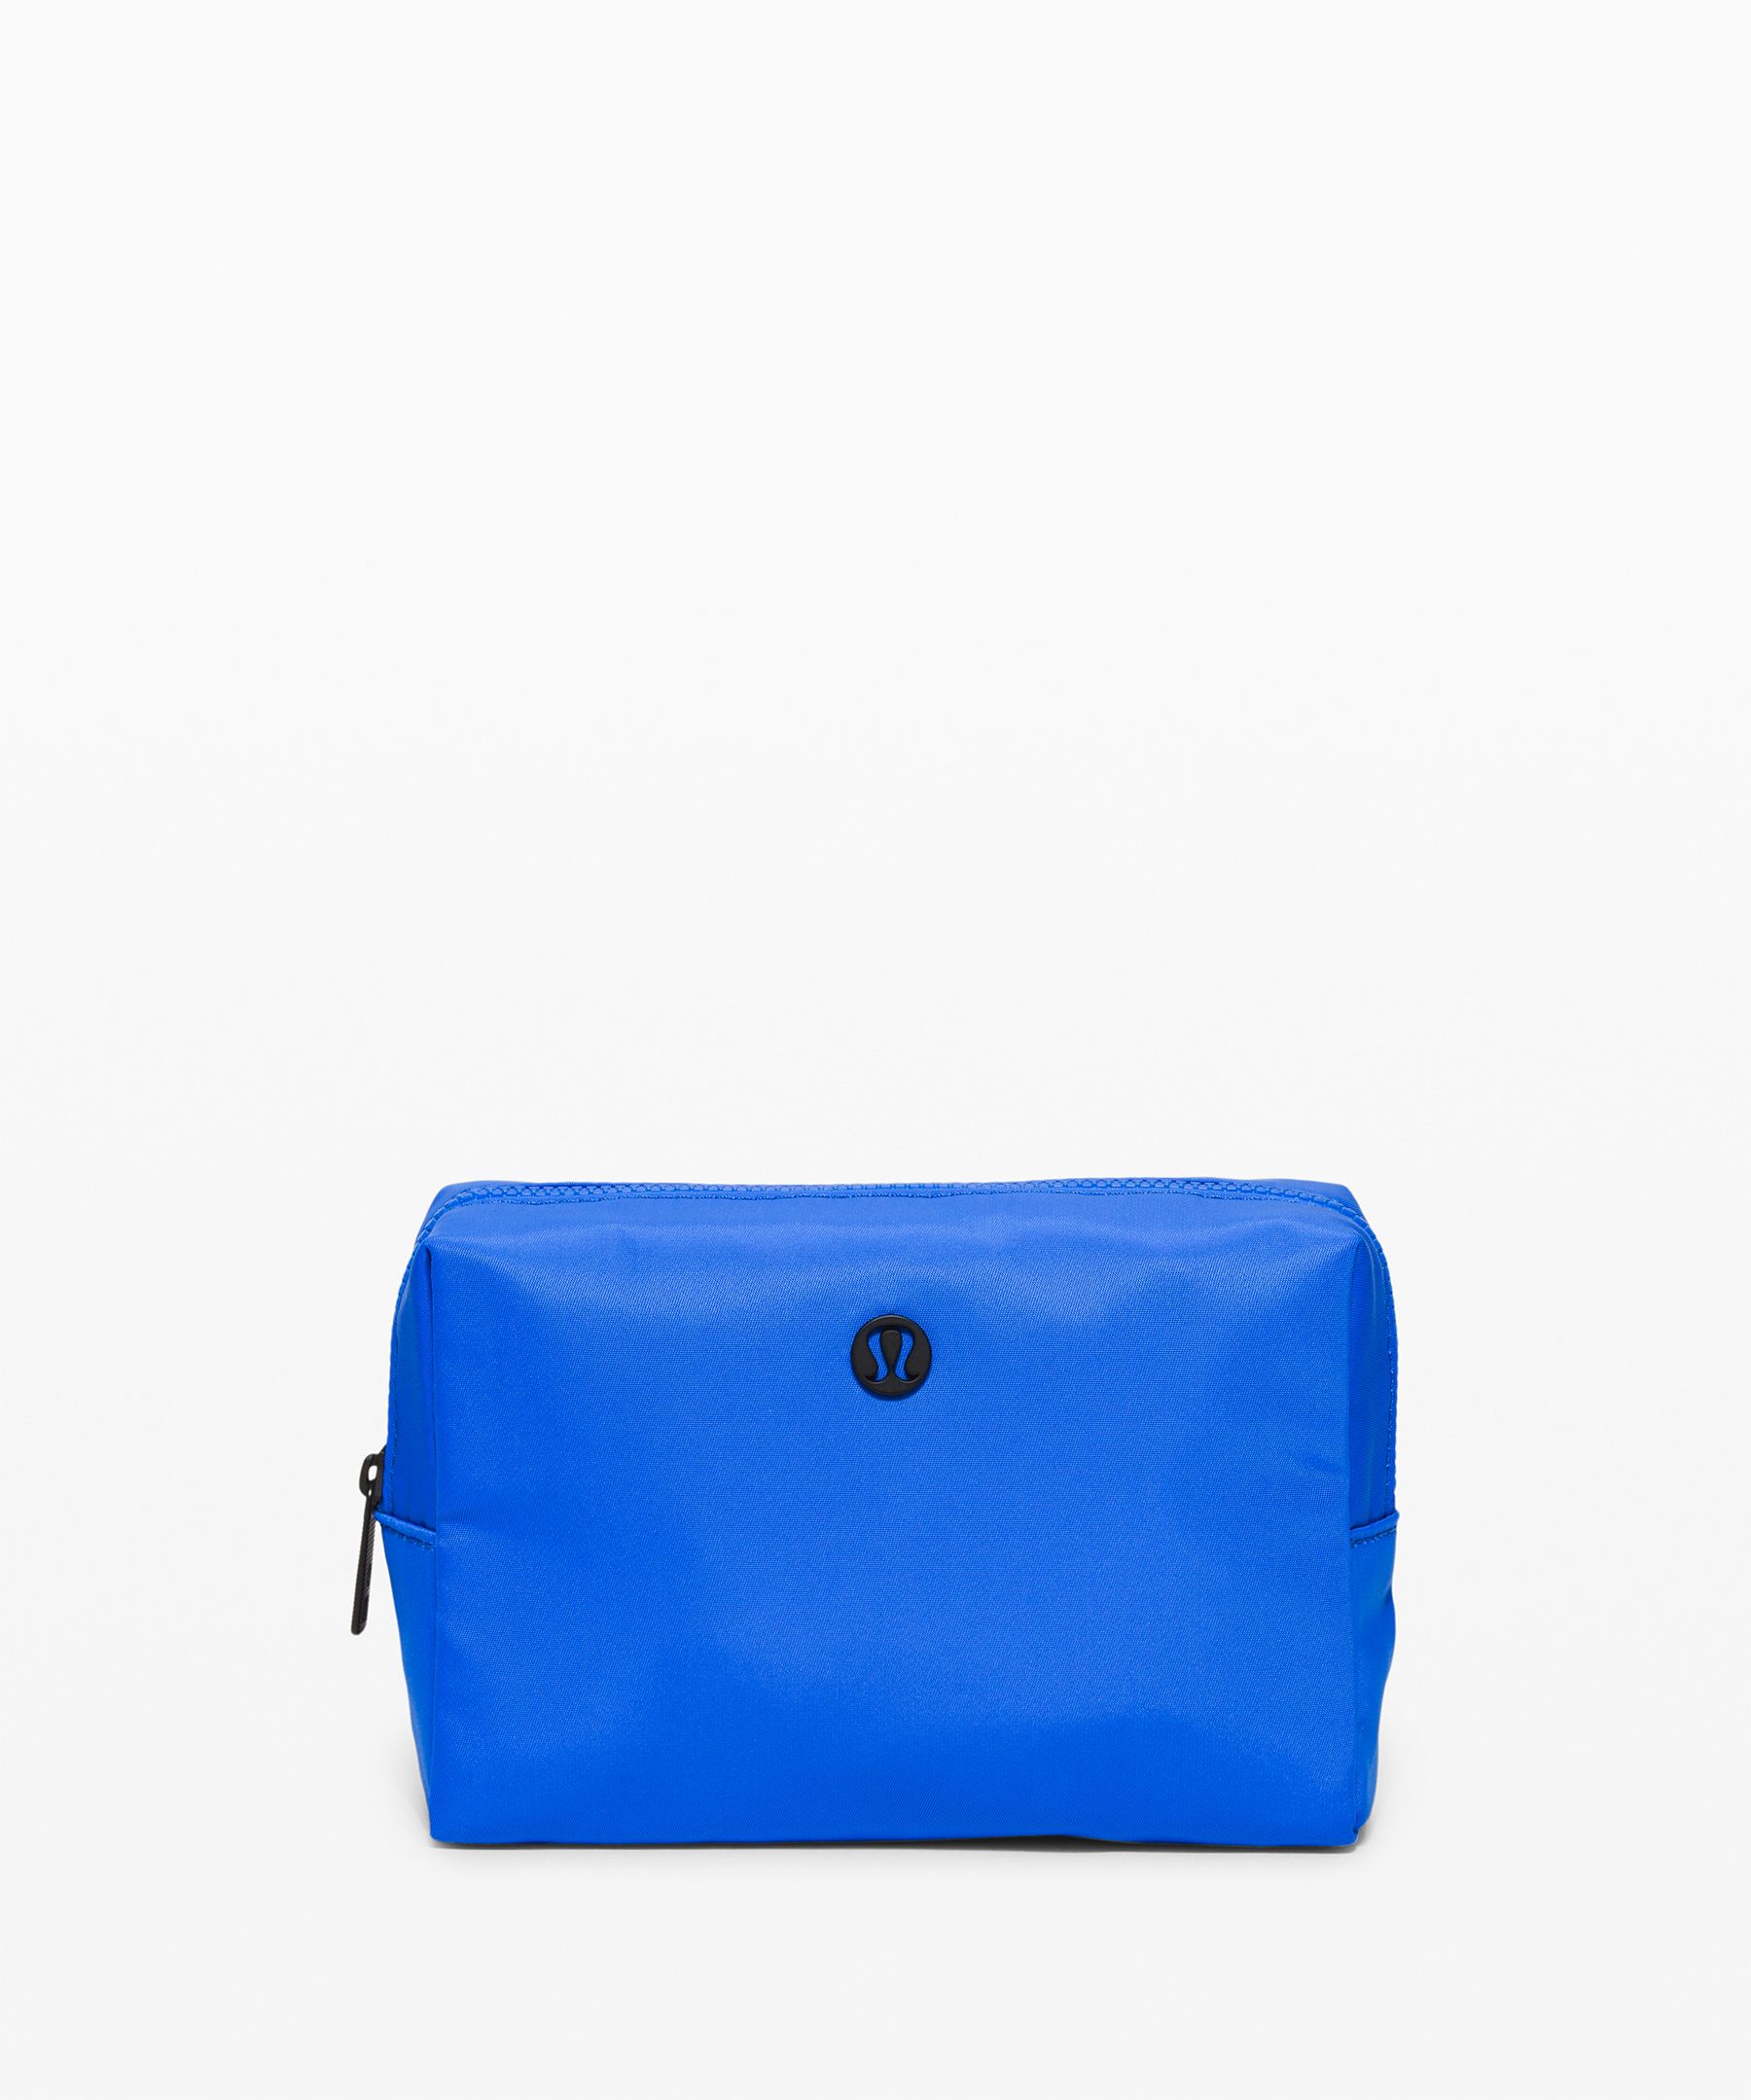 Lululemon All Your Small Things Pouch *2l Mini In Wild Bluebell